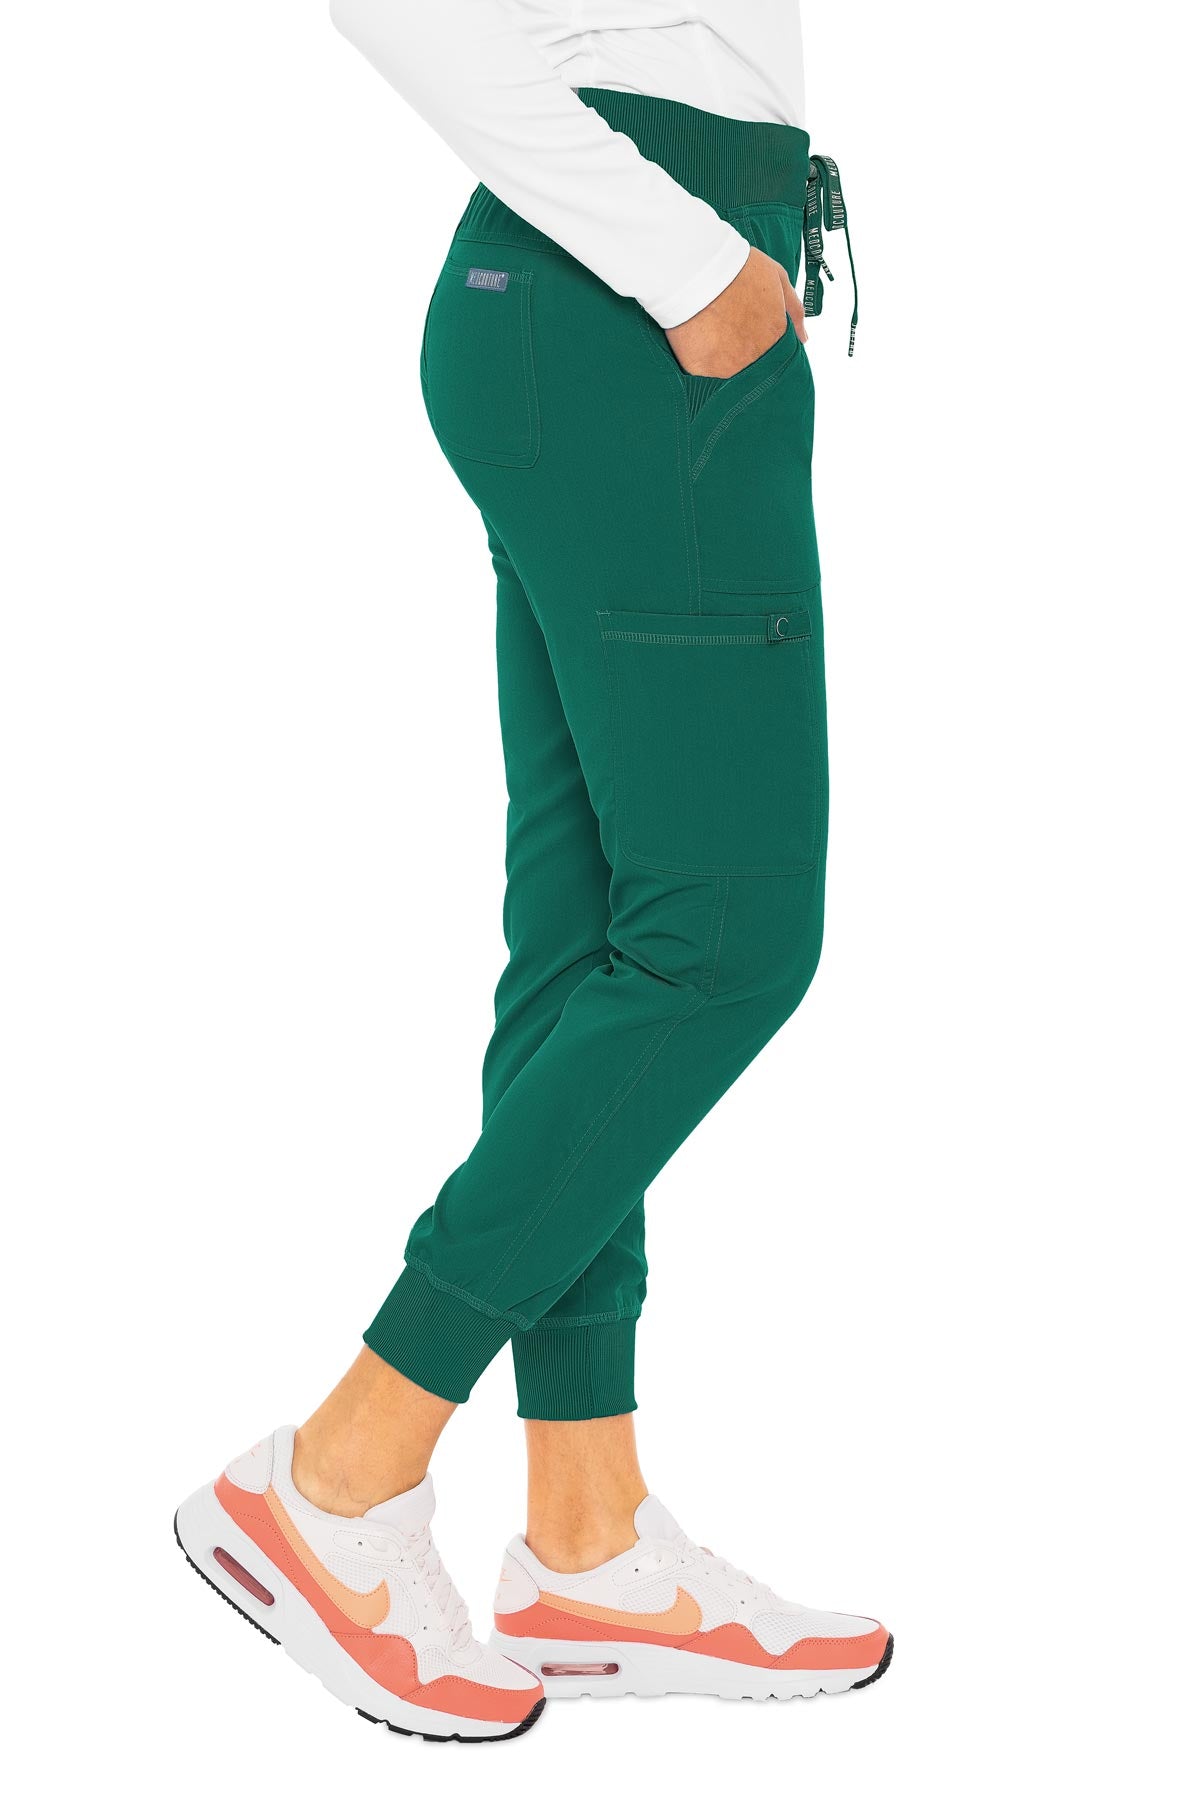 Med Couture Touch 7725 Women's Yoga 2 Cargo Pant - TALL